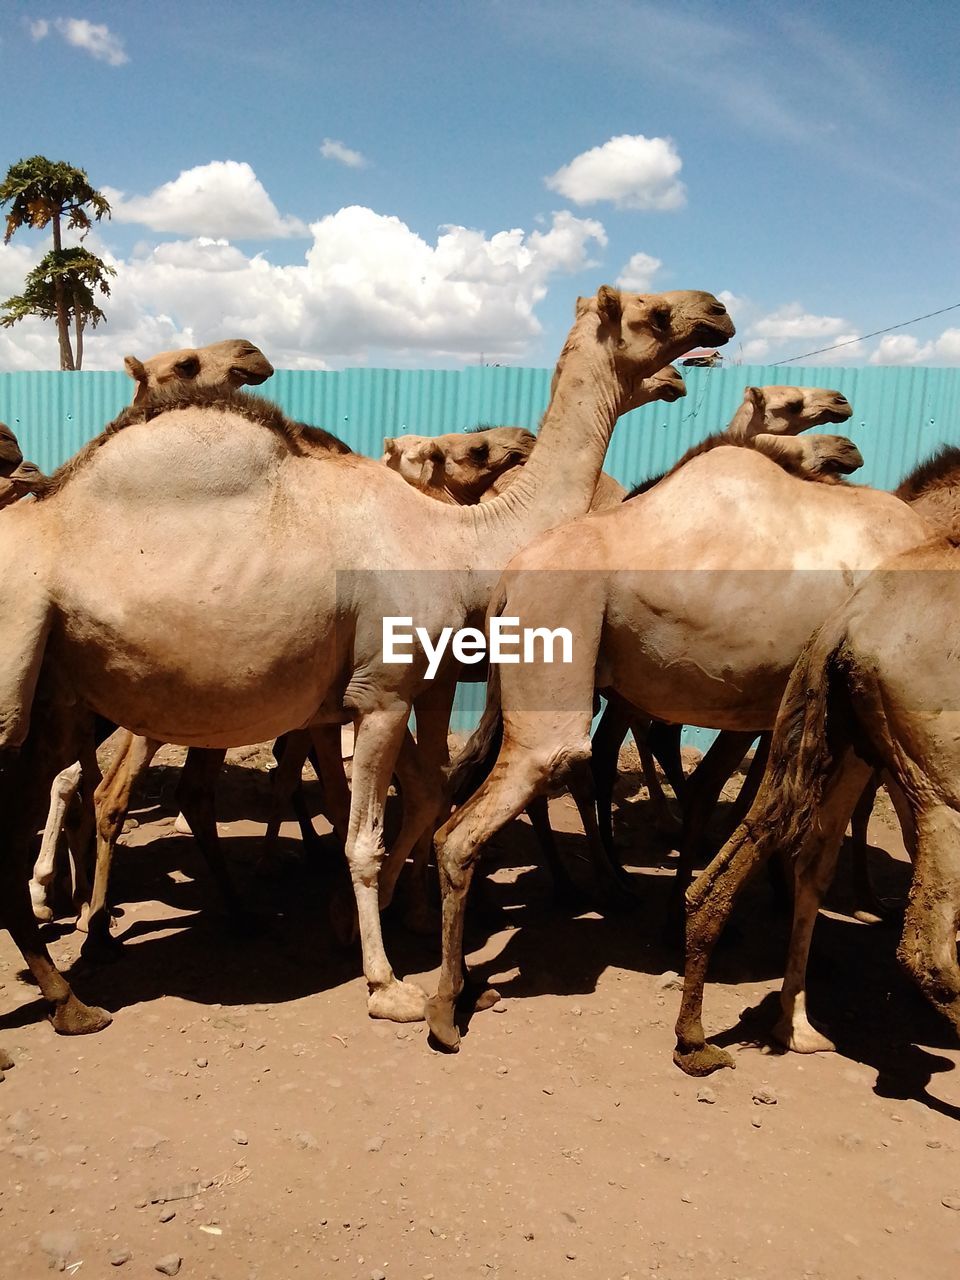 Camels standing outdoors